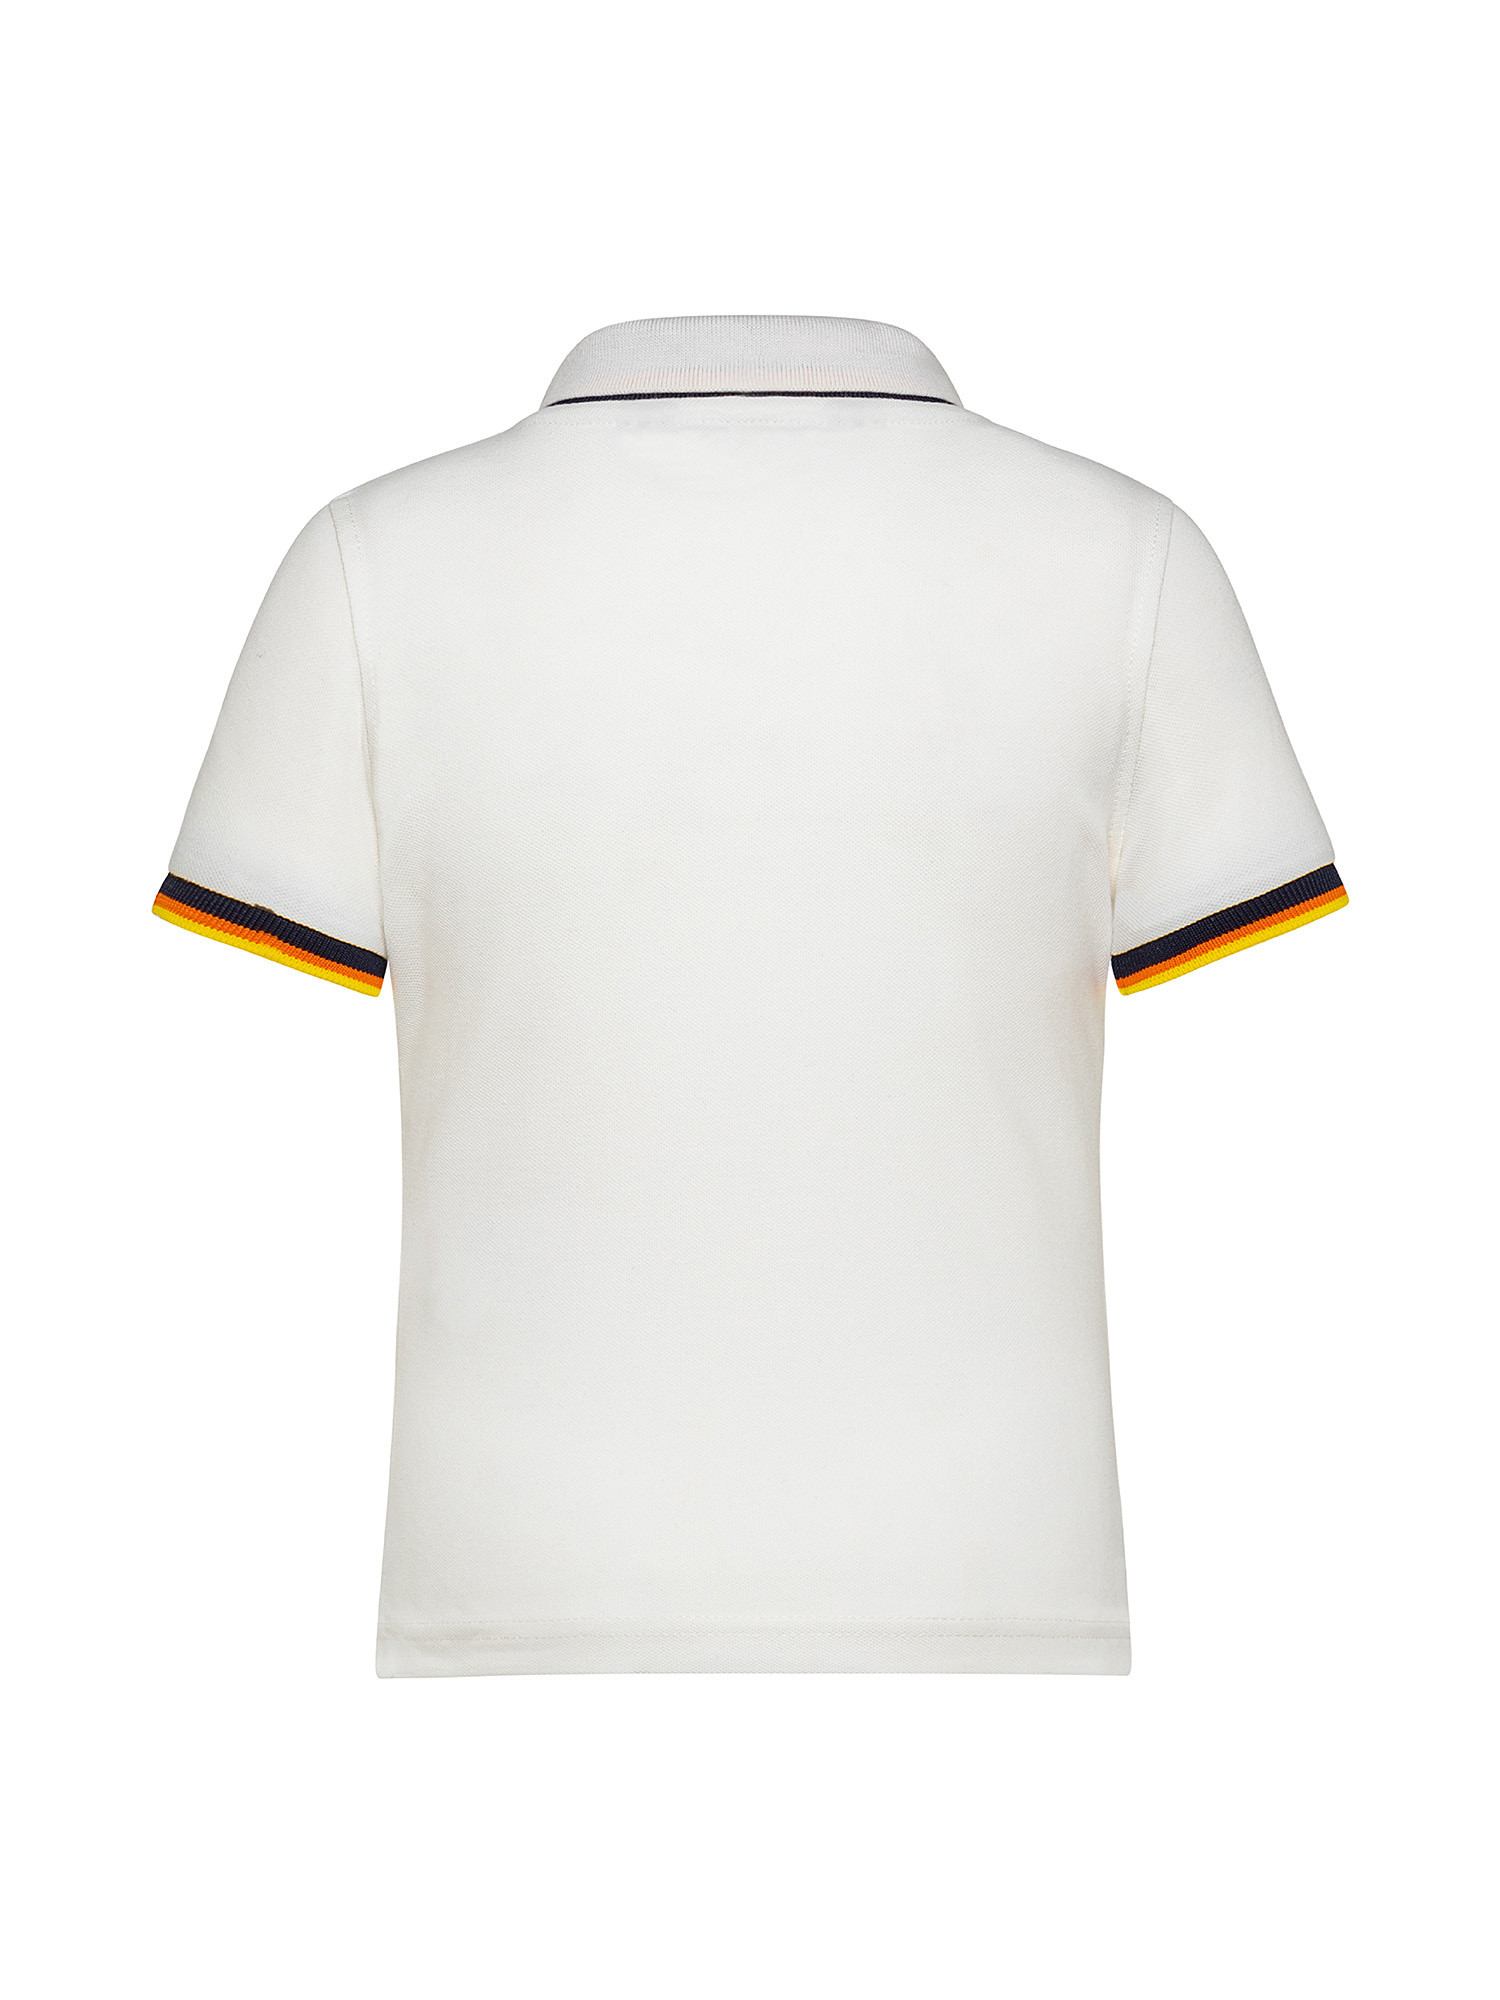 Polo bambino slim fit, Bianco, large image number 1